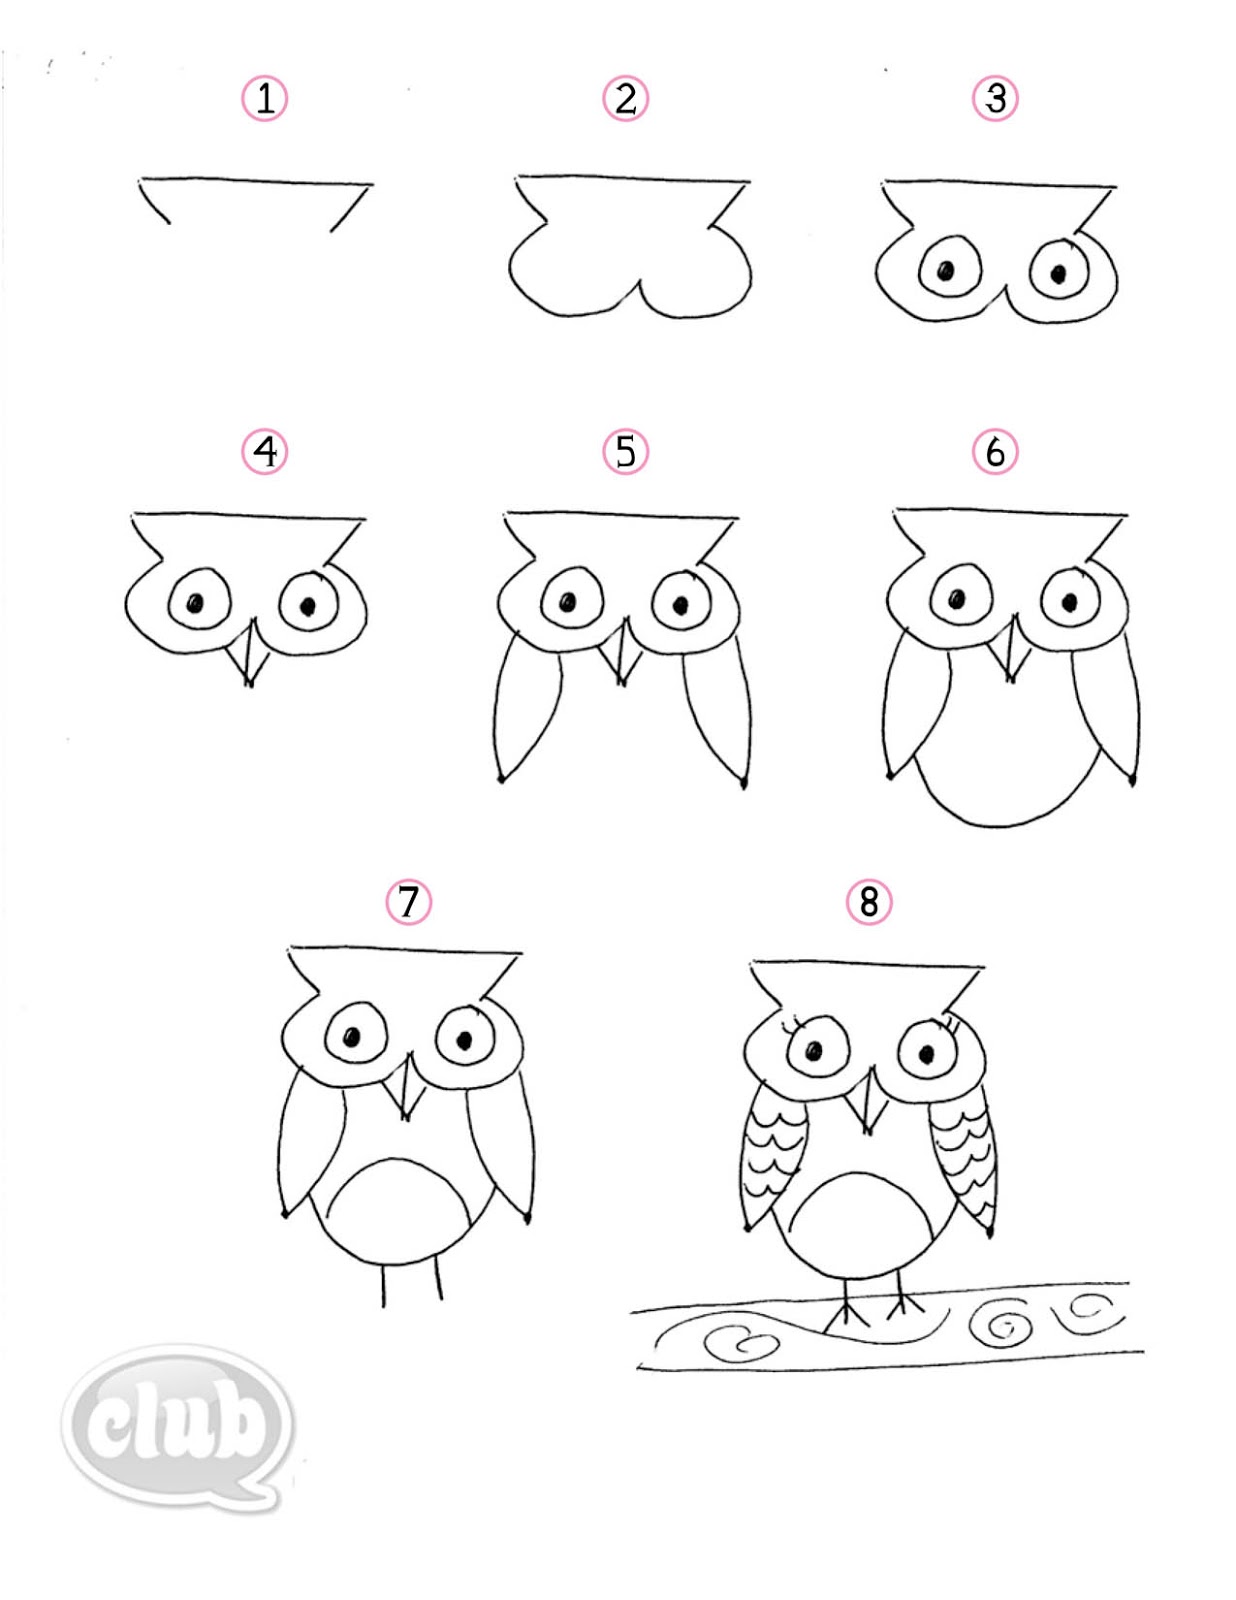 Amazing How To Draw An Owl Step By Step of the decade Check it out now 